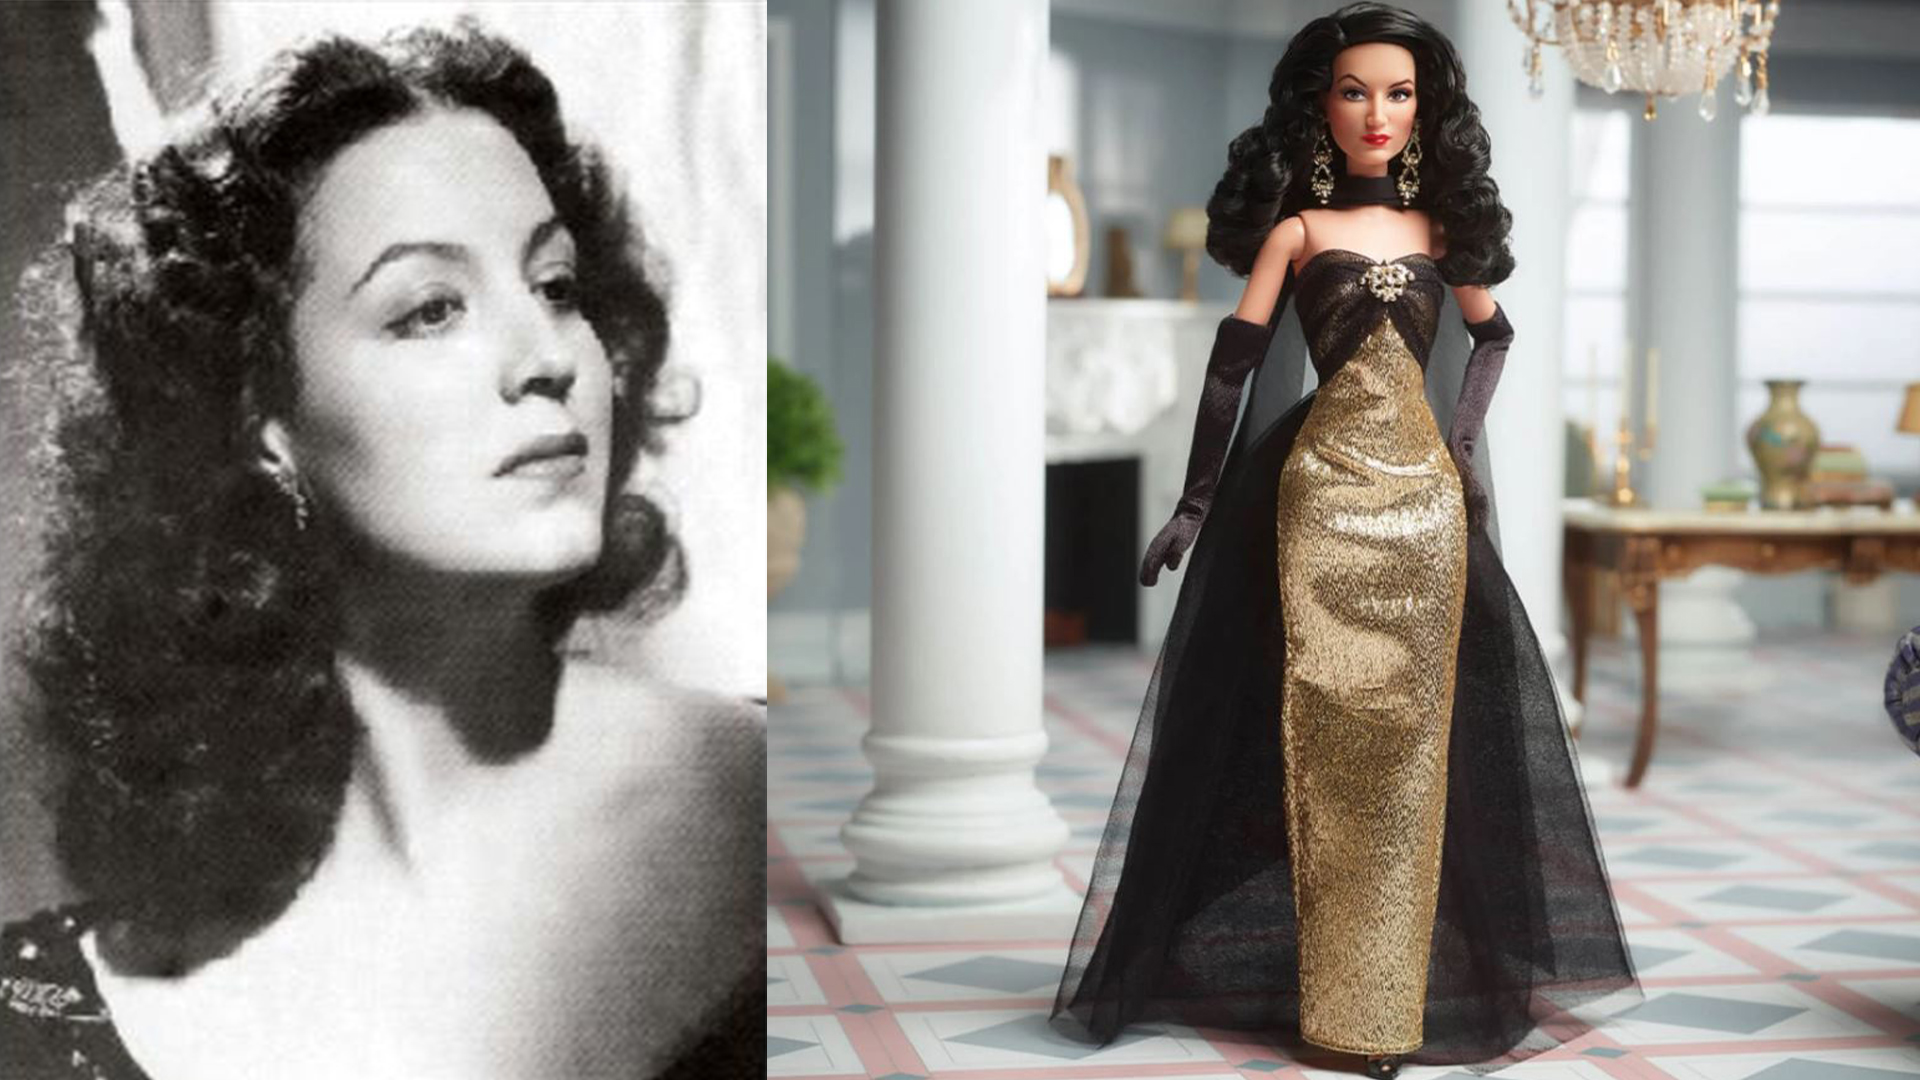 Maria Felix Cause of Death, Biography, Age, Height, Movies, Net Worth, Husband, Children